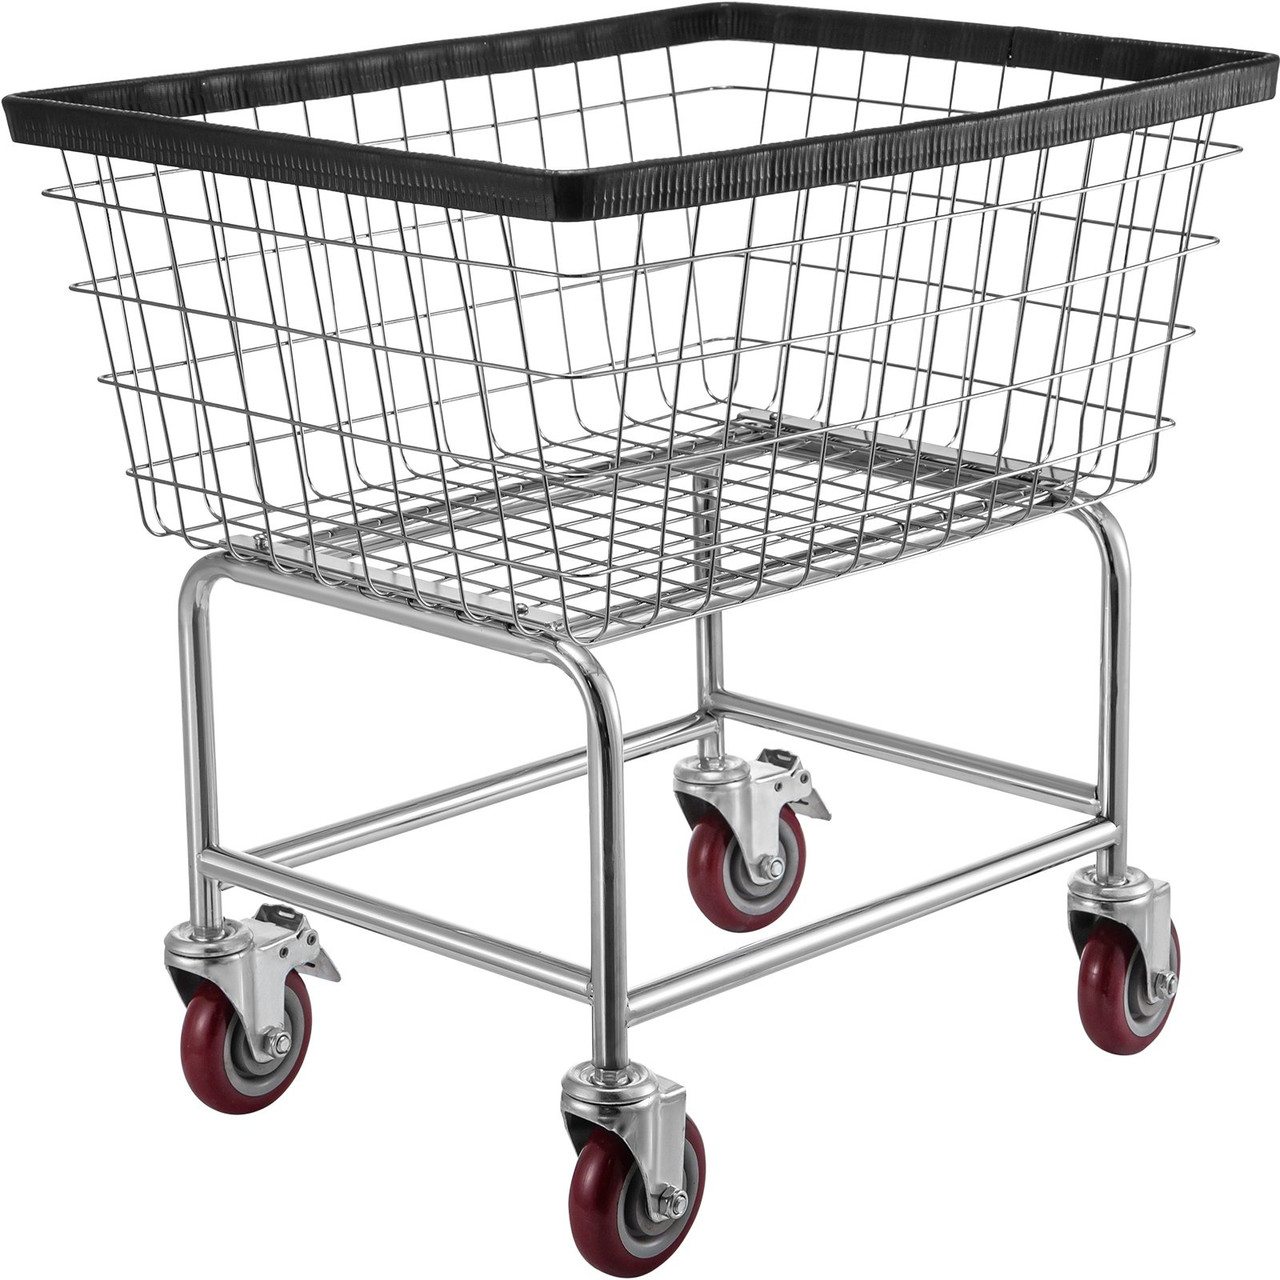 Wire Laundry Cart 2.2 Bushel, Wire Laundry Basket With Wheels 20''x15.7''x26'', Commercial Wire Laundry Basket Cart, Galvanized Steel Frame with 5'' Casters, Wire Basket Cart for Laundry